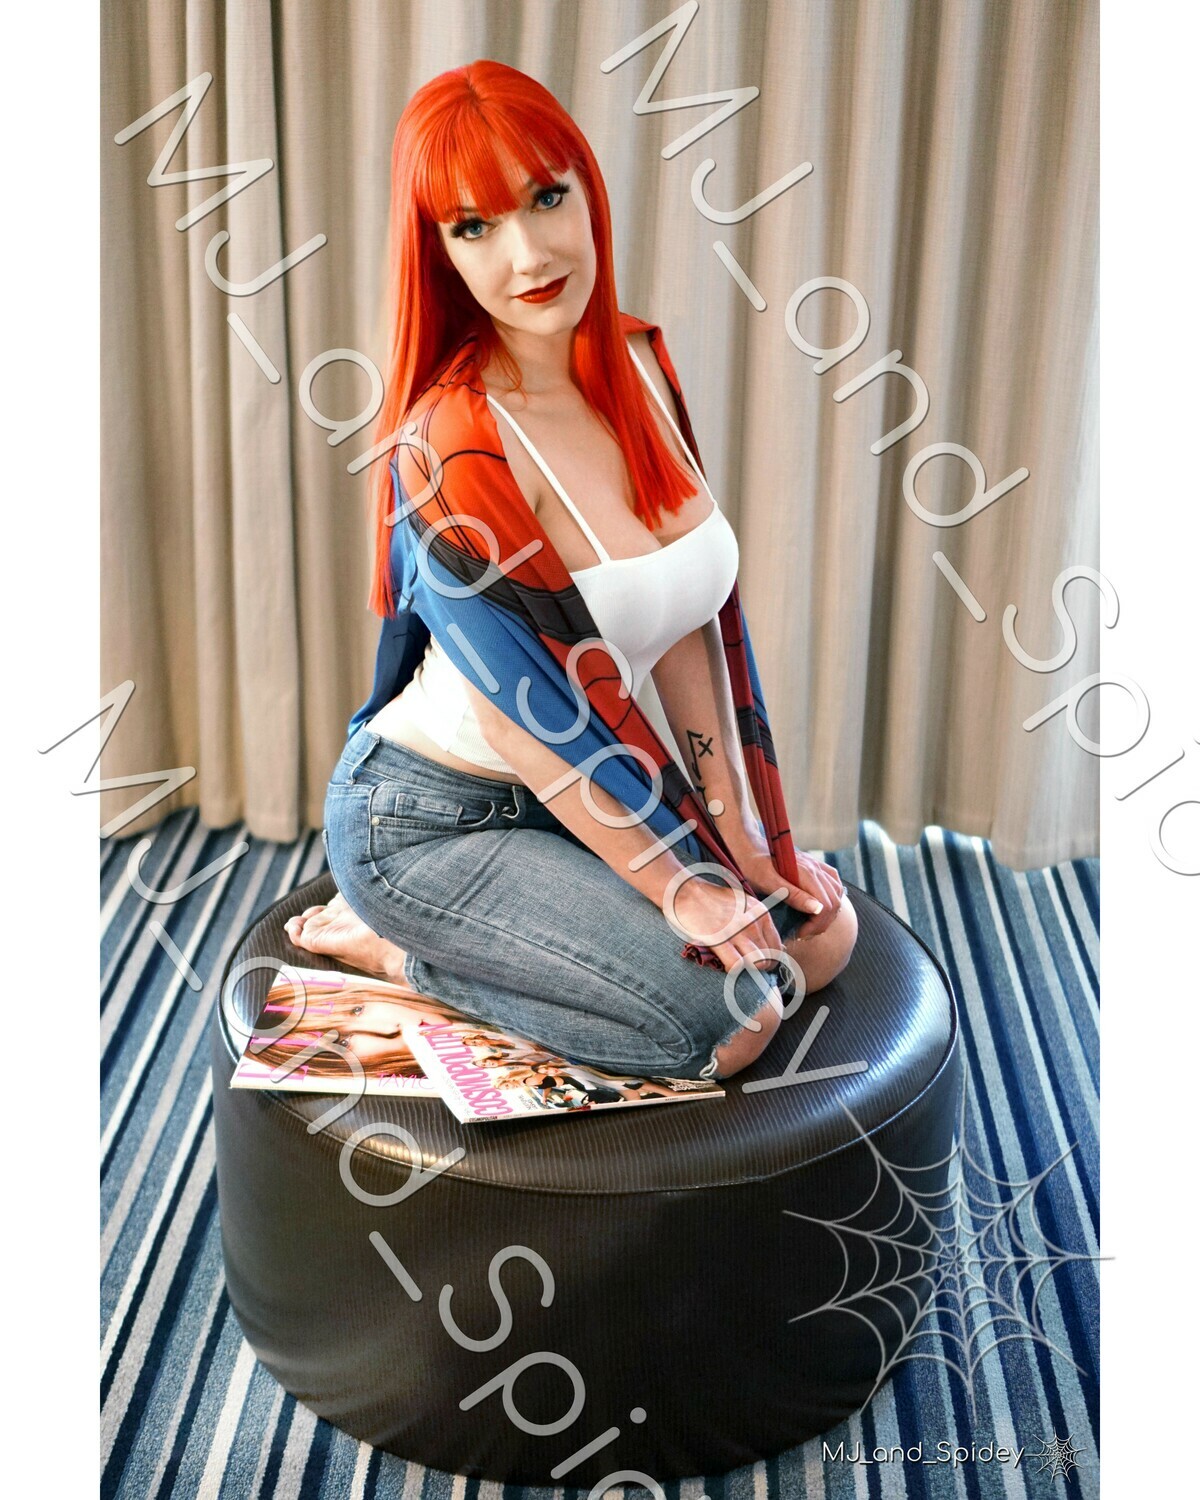 Marvel - Spider-Man - Mary Jane Watson - Campbell No. 1 - 8x10 Cosplay Print (@MJ_and_Spidey, MJ and Spidey, Comics)